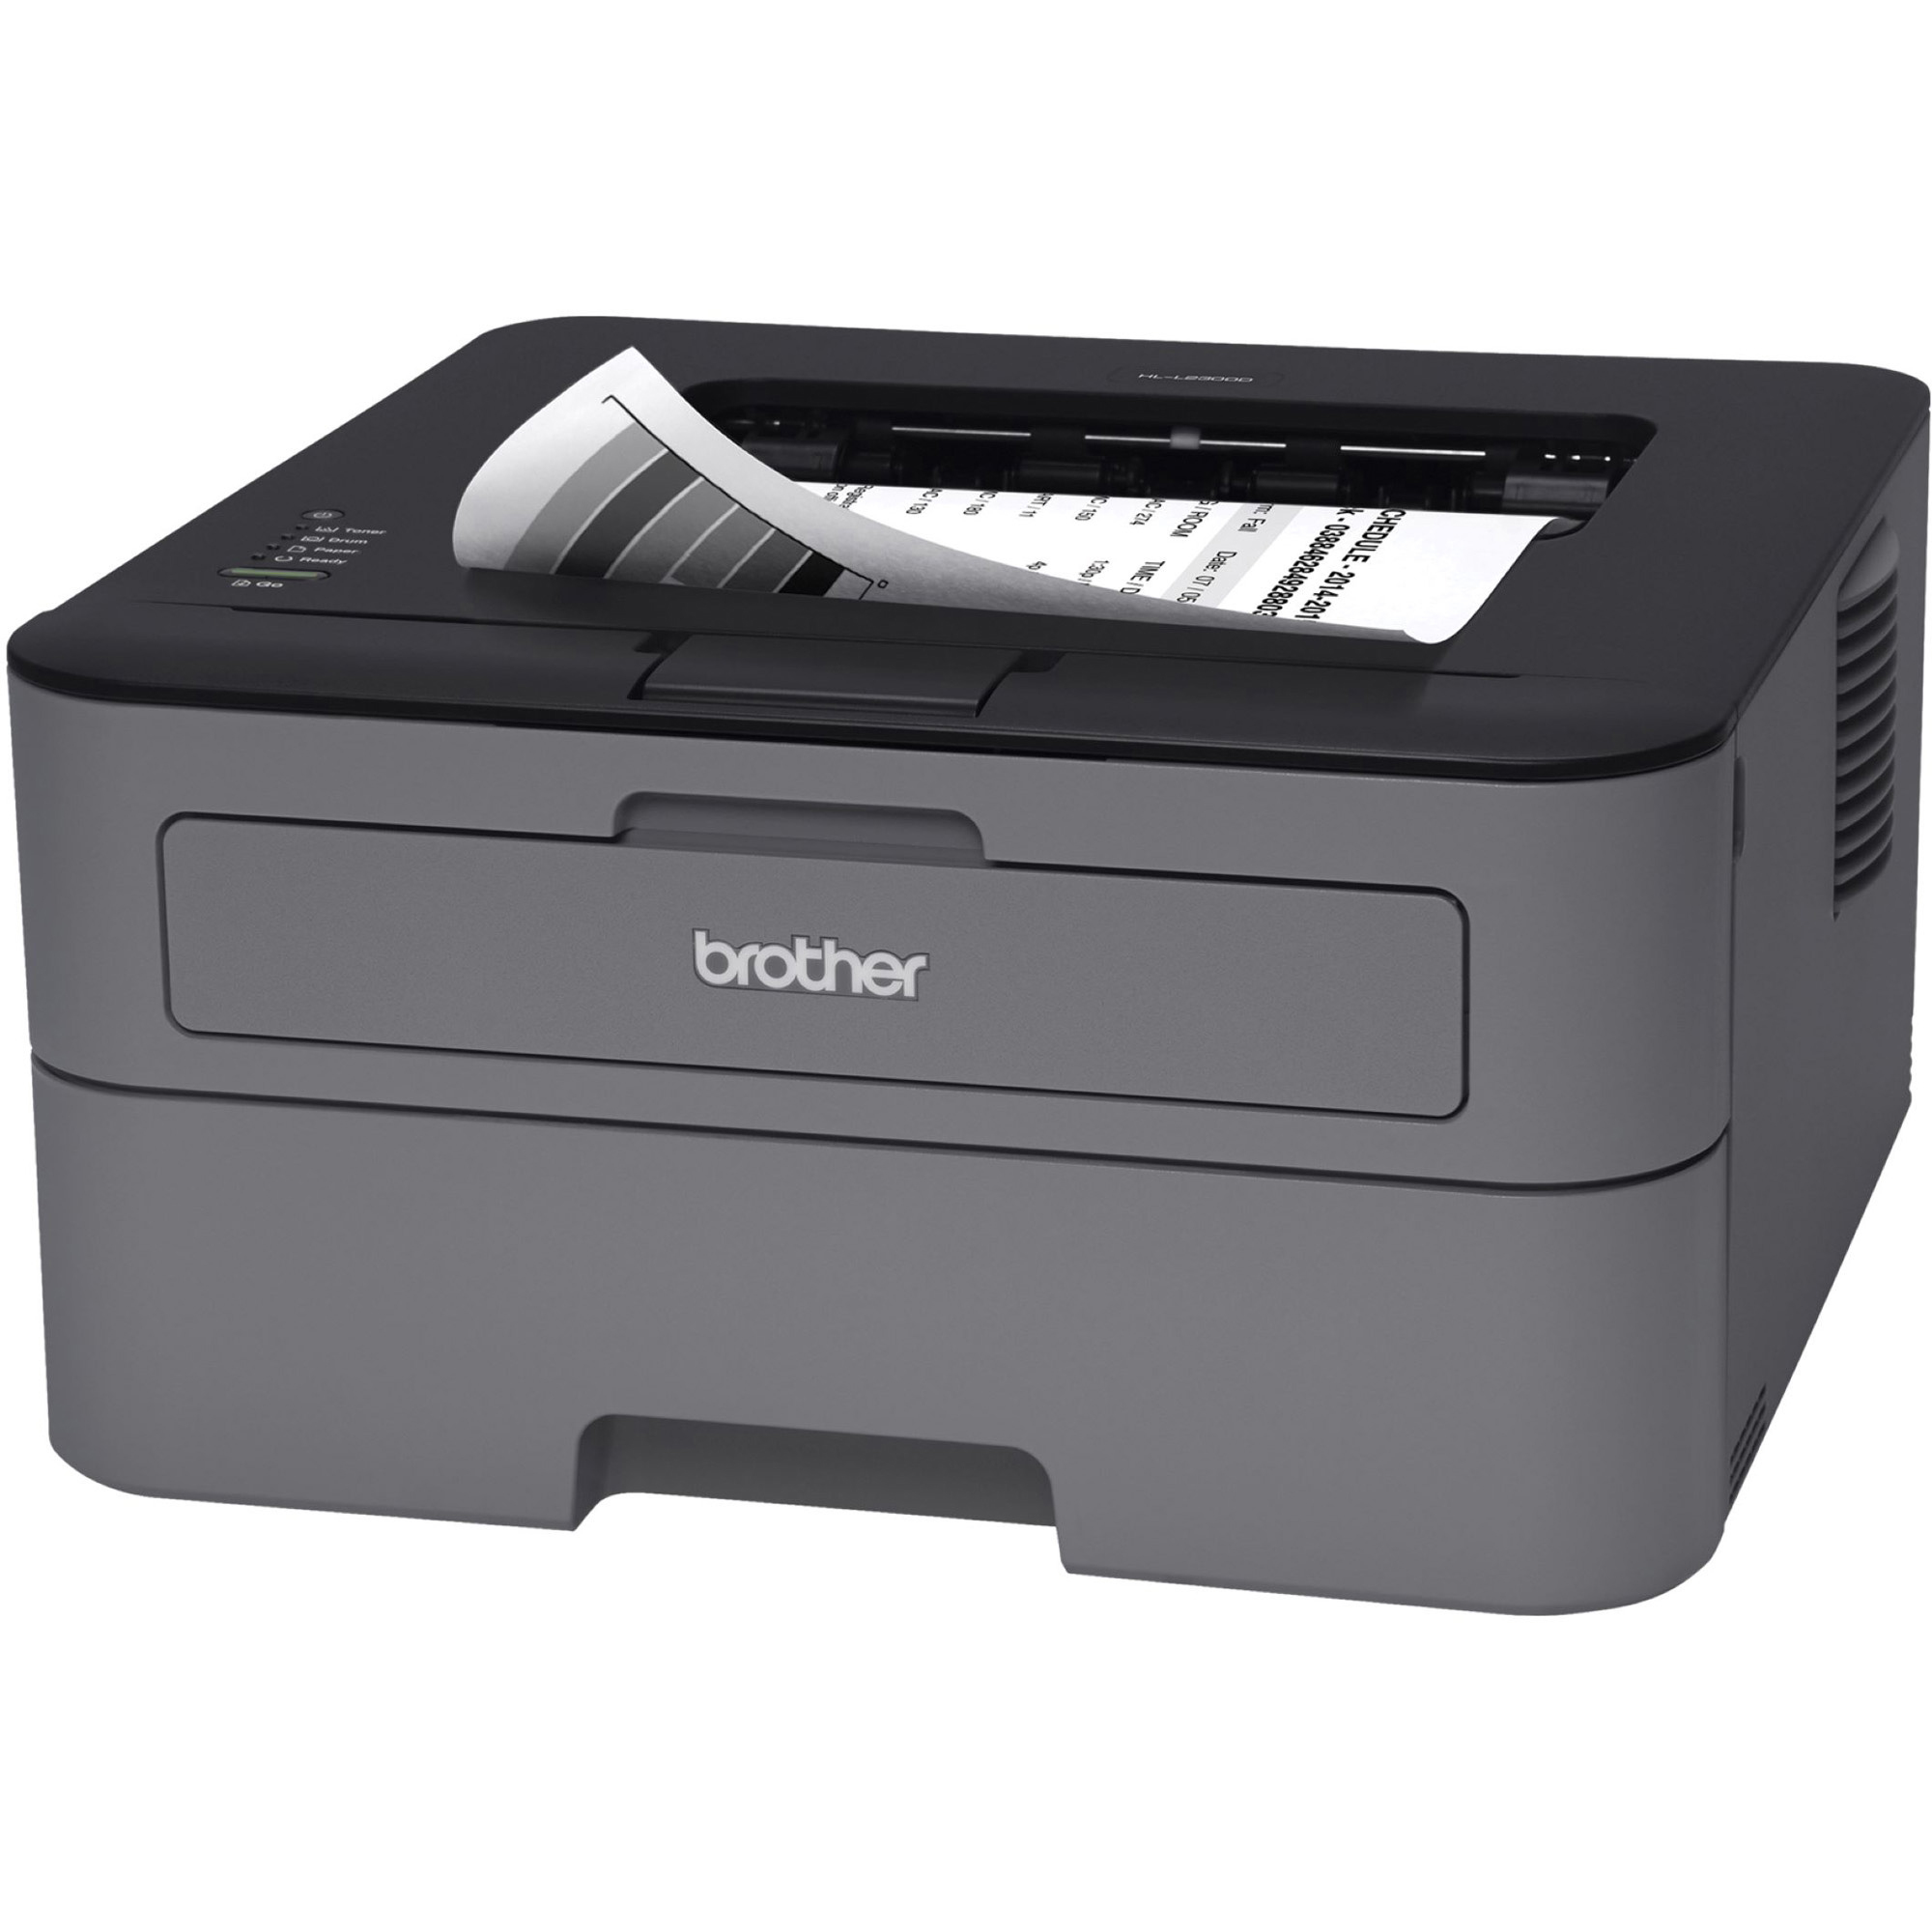 Brother HLL2300D Compact Monochrome Laser Printer, Duplex Printing - image 4 of 4